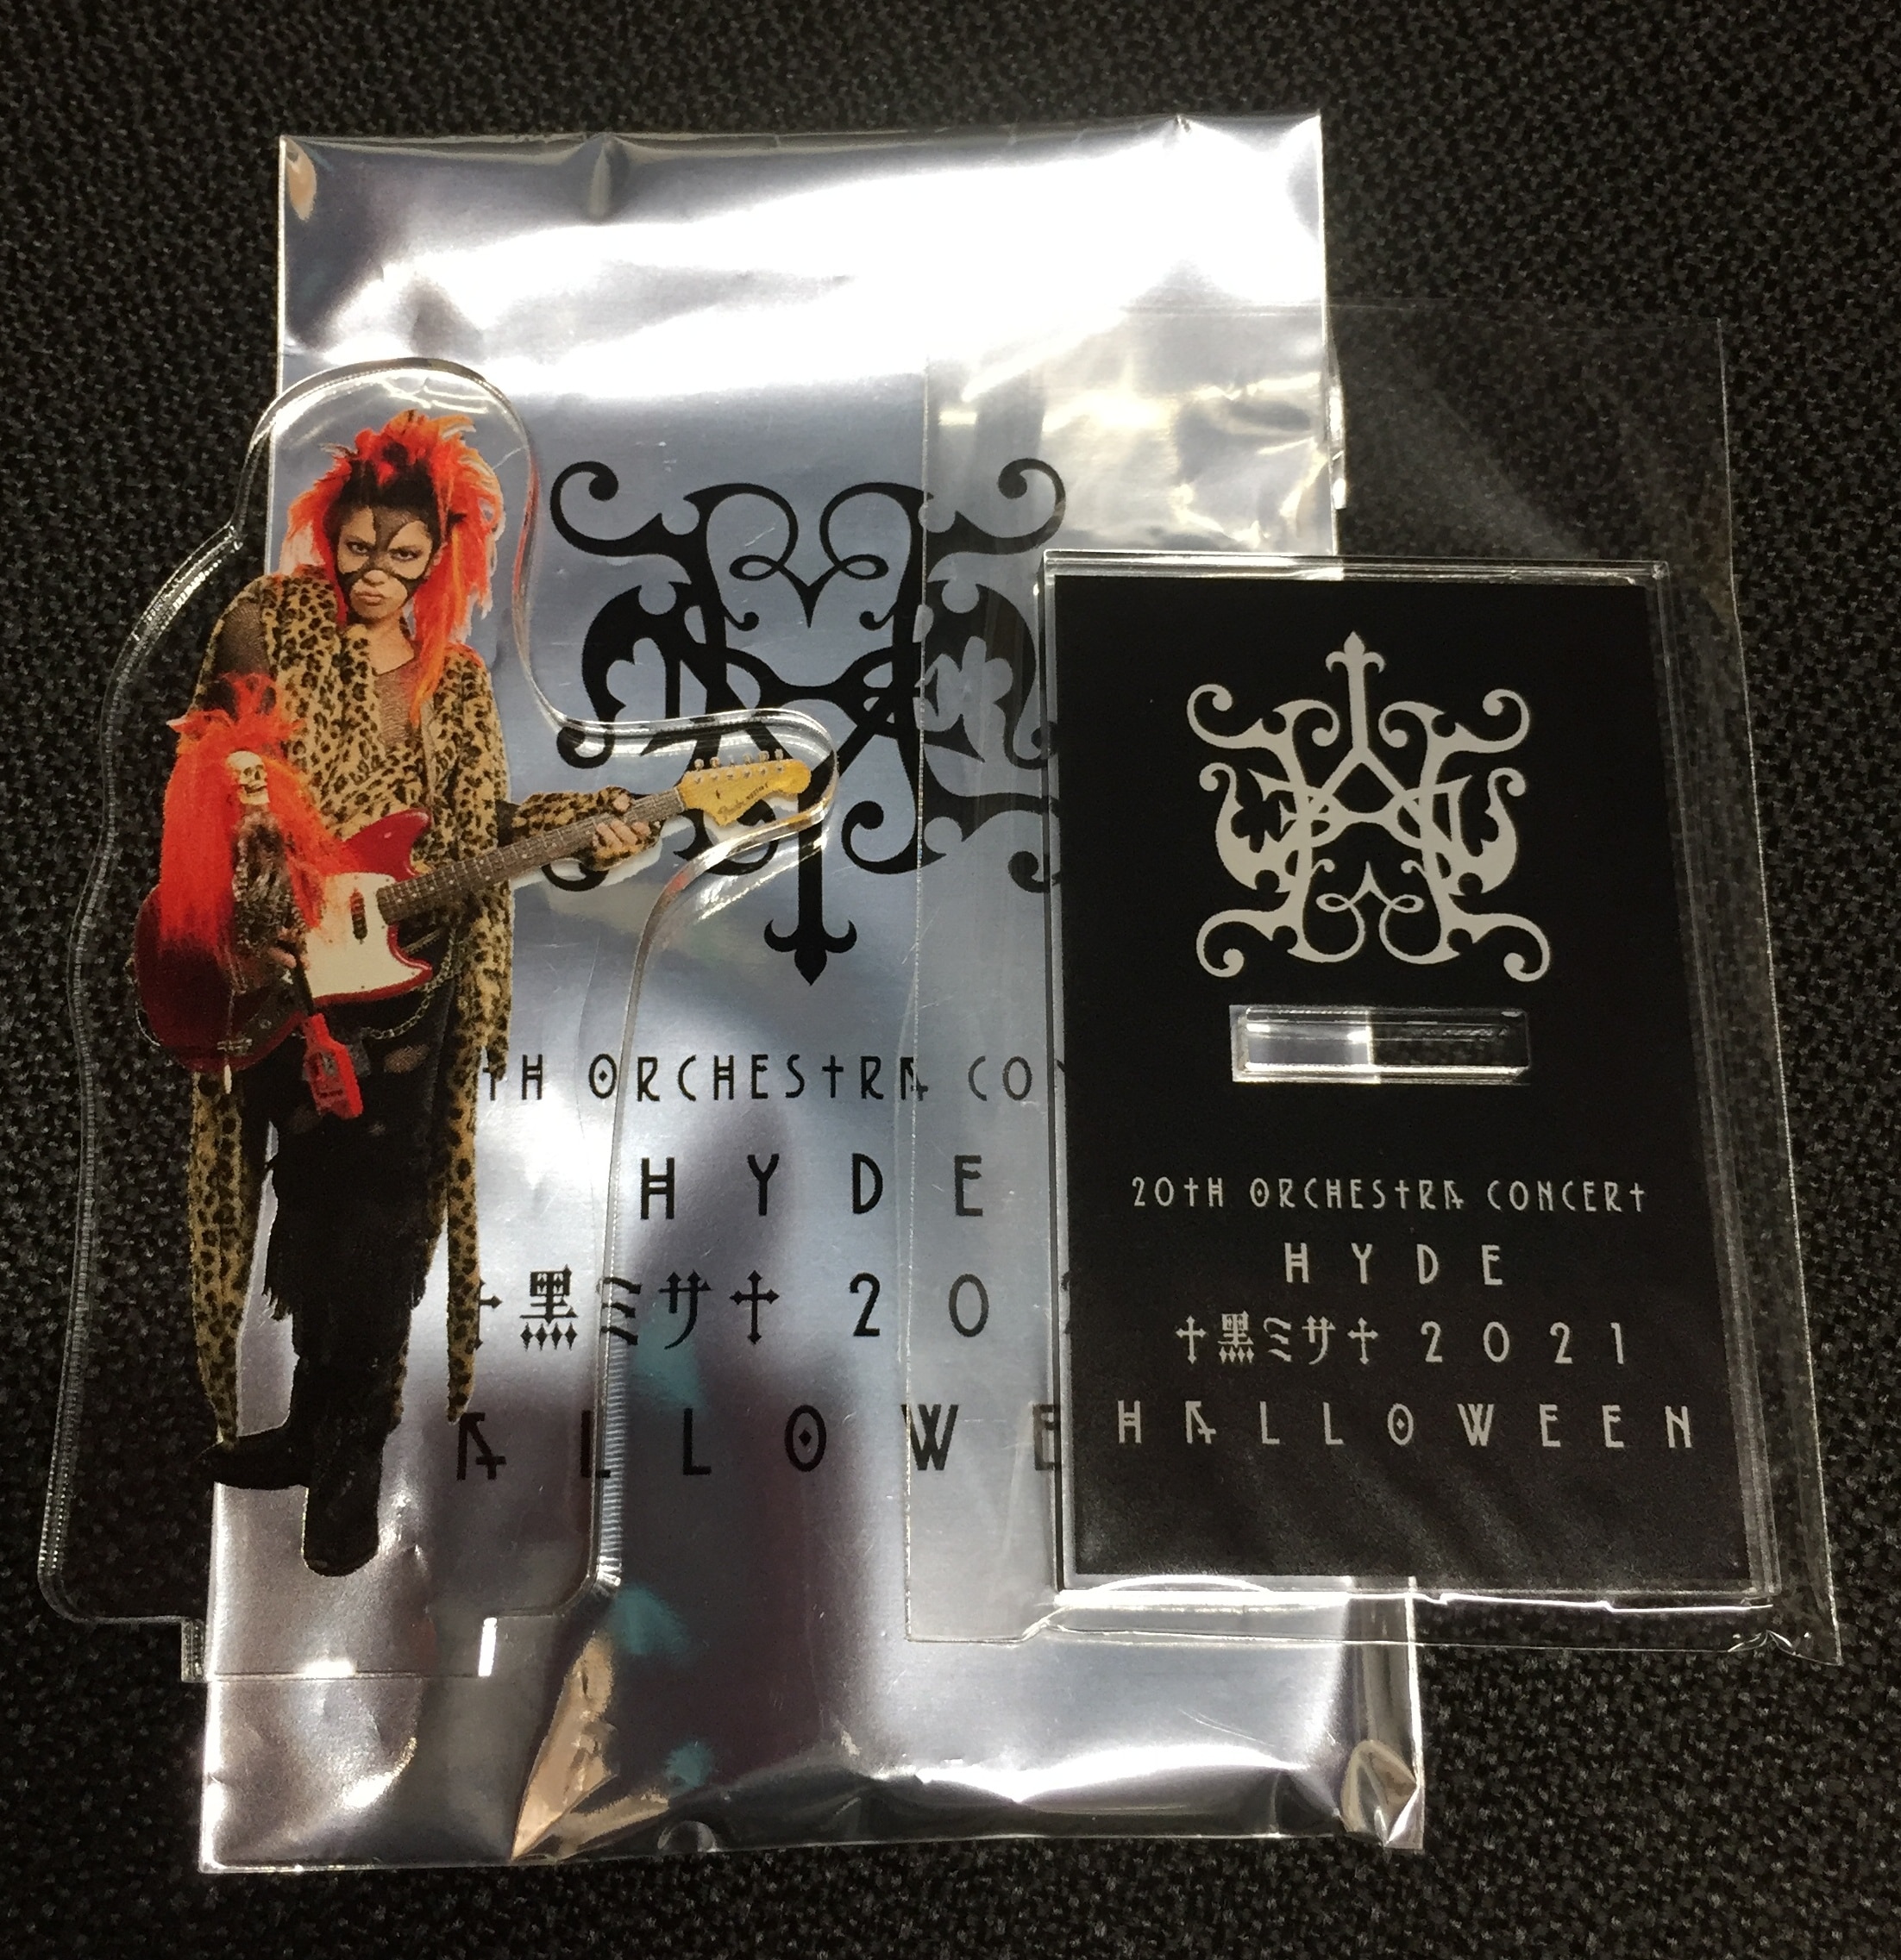 HYDE 20th Orchestra Concert HYDE 黒ミサ 2021 Halloween 歴代 HYDE 